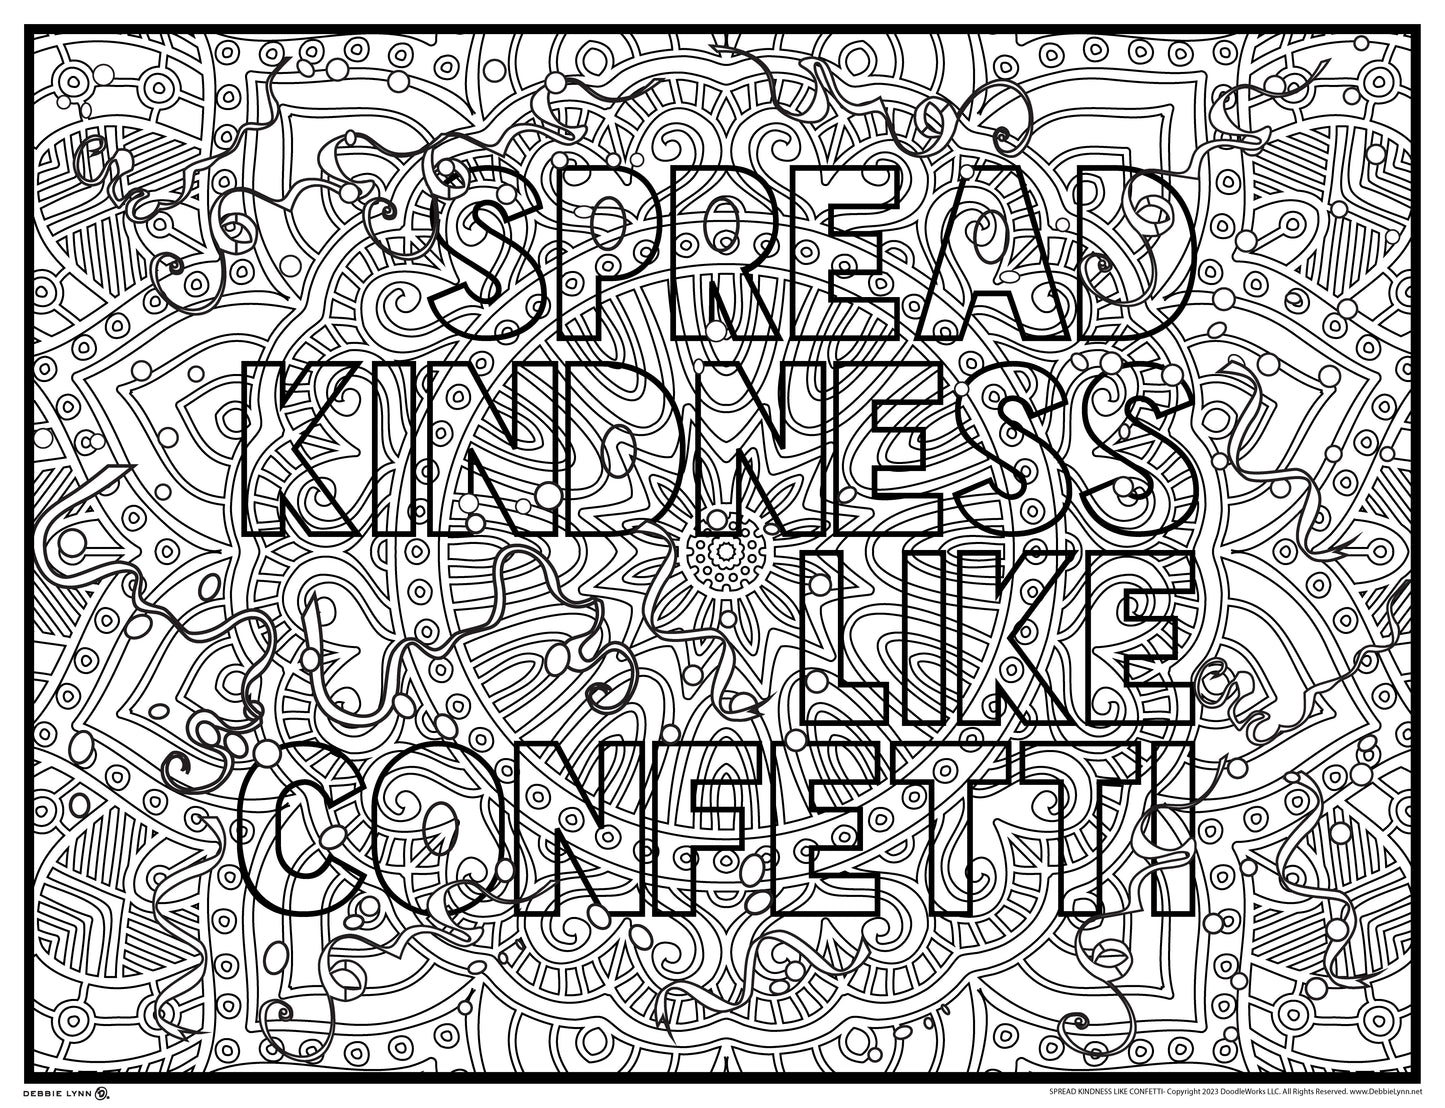 Spread Kindness Like Confetti Personalized Giant Coloring Poster 46"x60"